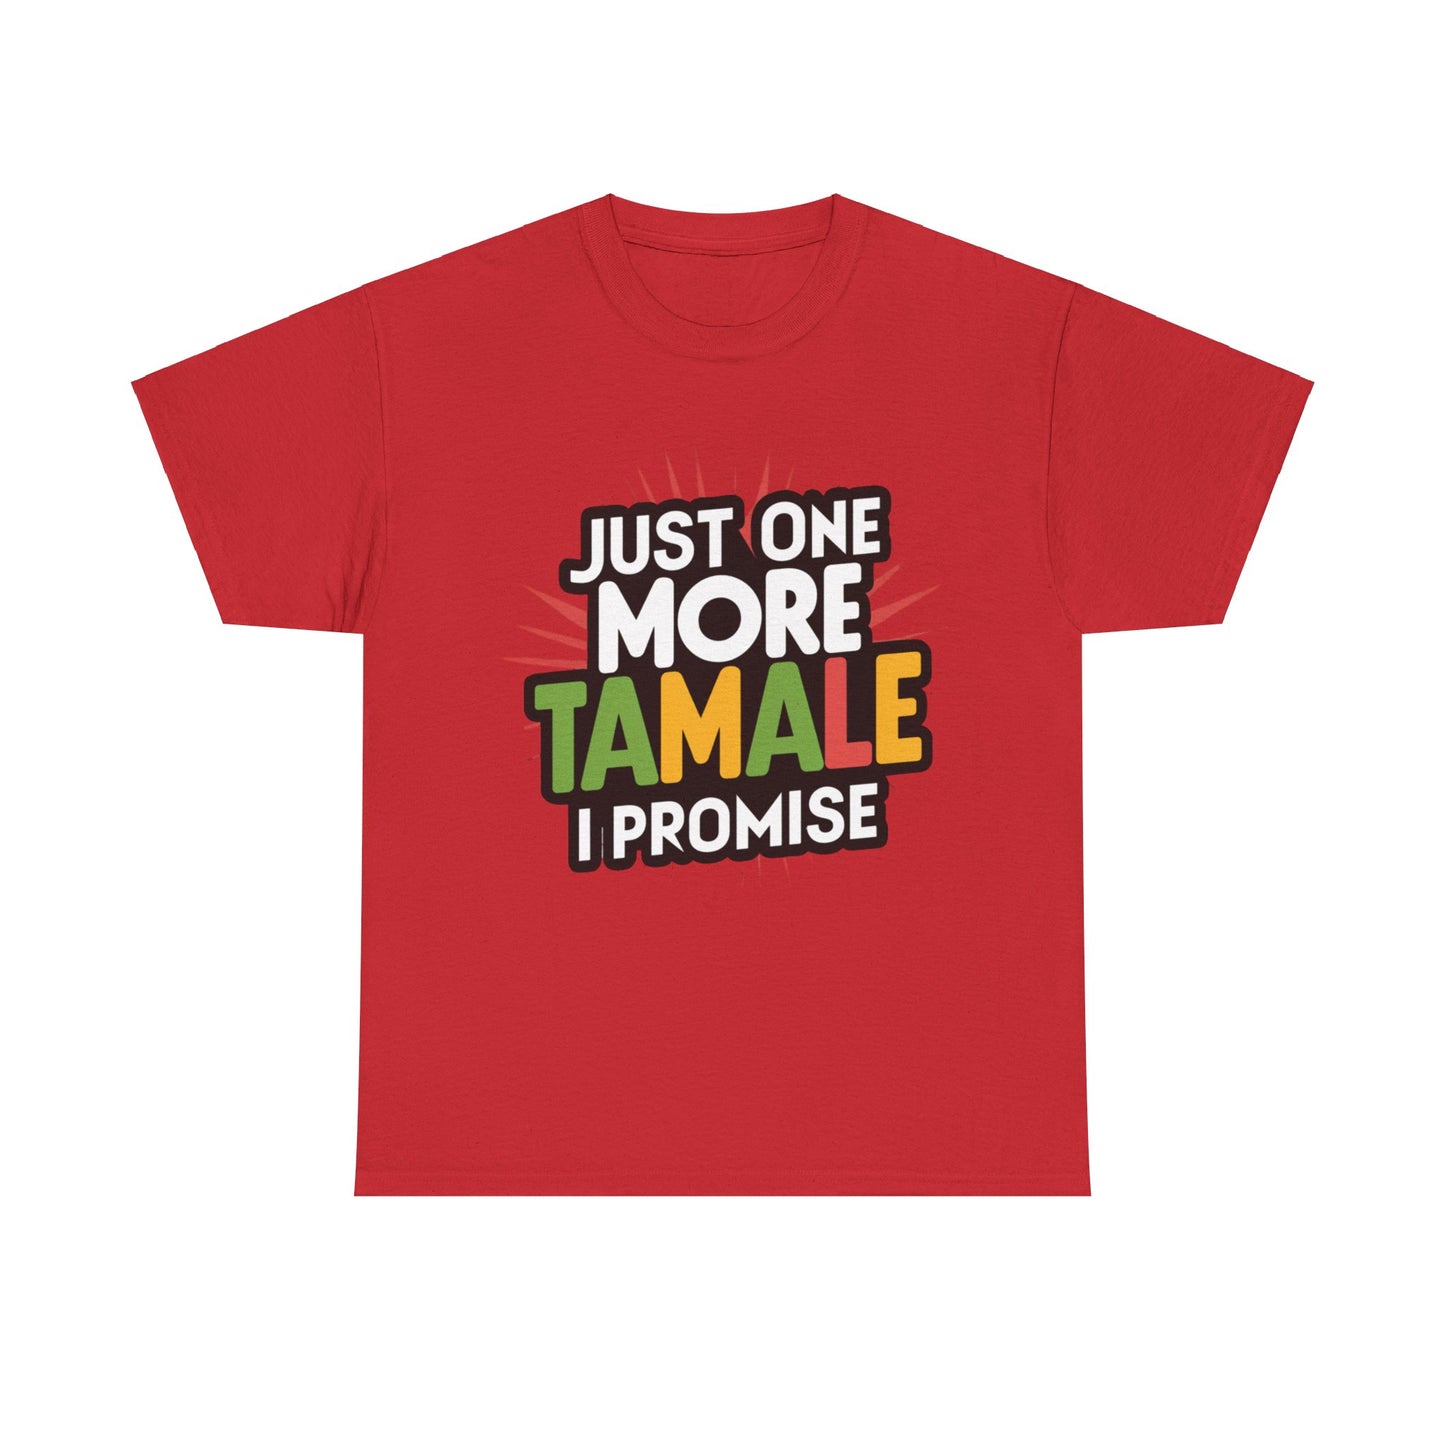 Just One More Tamale I Promise Mexican Food Graphic Unisex Heavy Cotton Tee Cotton Funny Humorous Graphic Soft Premium Unisex Men Women Red T-shirt Birthday Gift-7